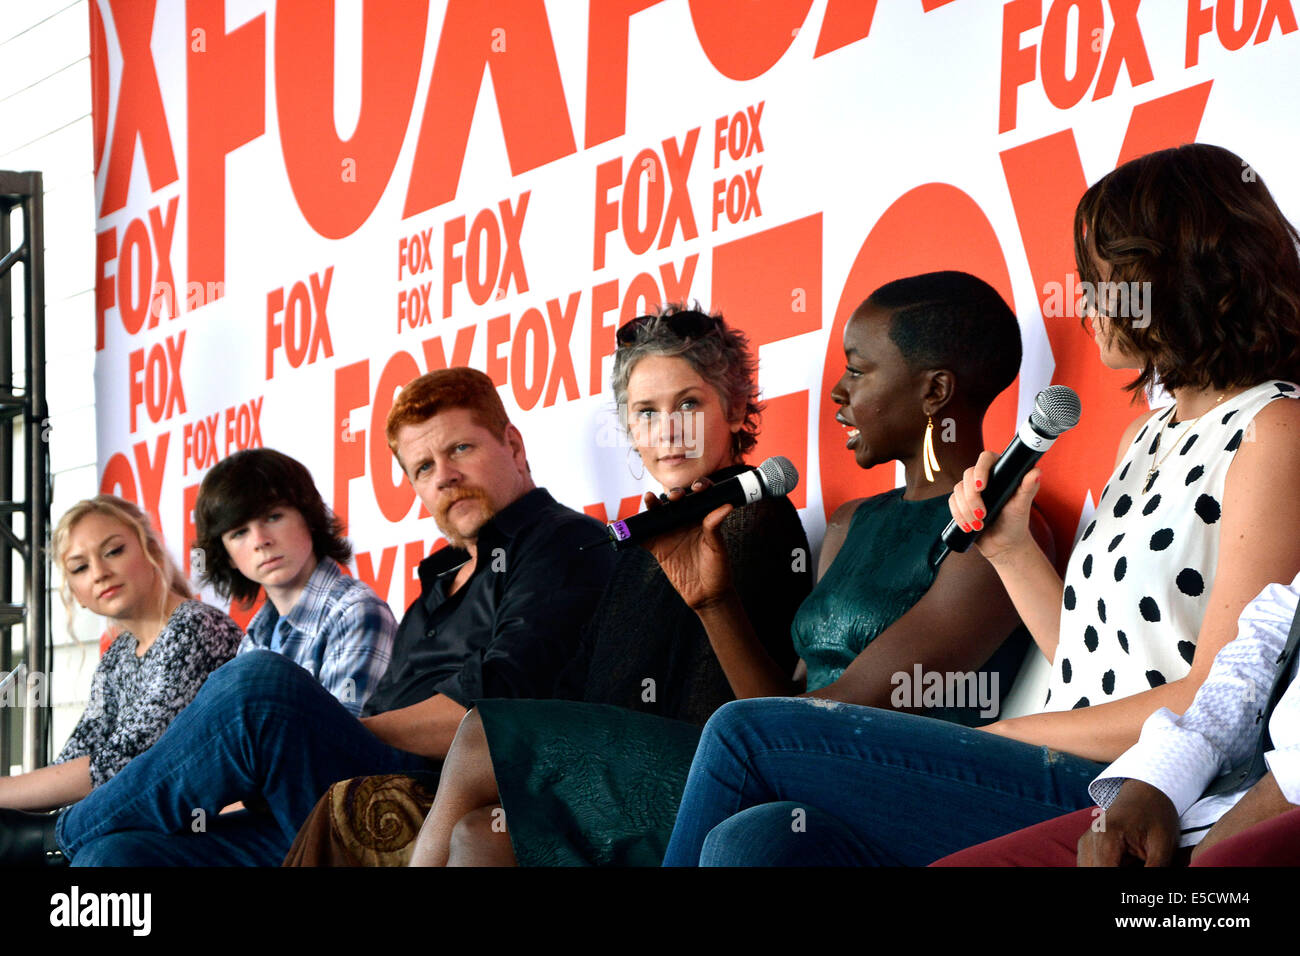 Emily Kinney, Chandler Riggs, Michael Cudlitz, Melissa McBride, Danai Gurira and Lauren Cohan attend the FOX Press Breakfast press conference of the series 'The Walking Dead' on July 25, 2014 at the roof lounge of the Andaz Hotel in San Diego during the San Diego Comic-Con International. Stock Photo